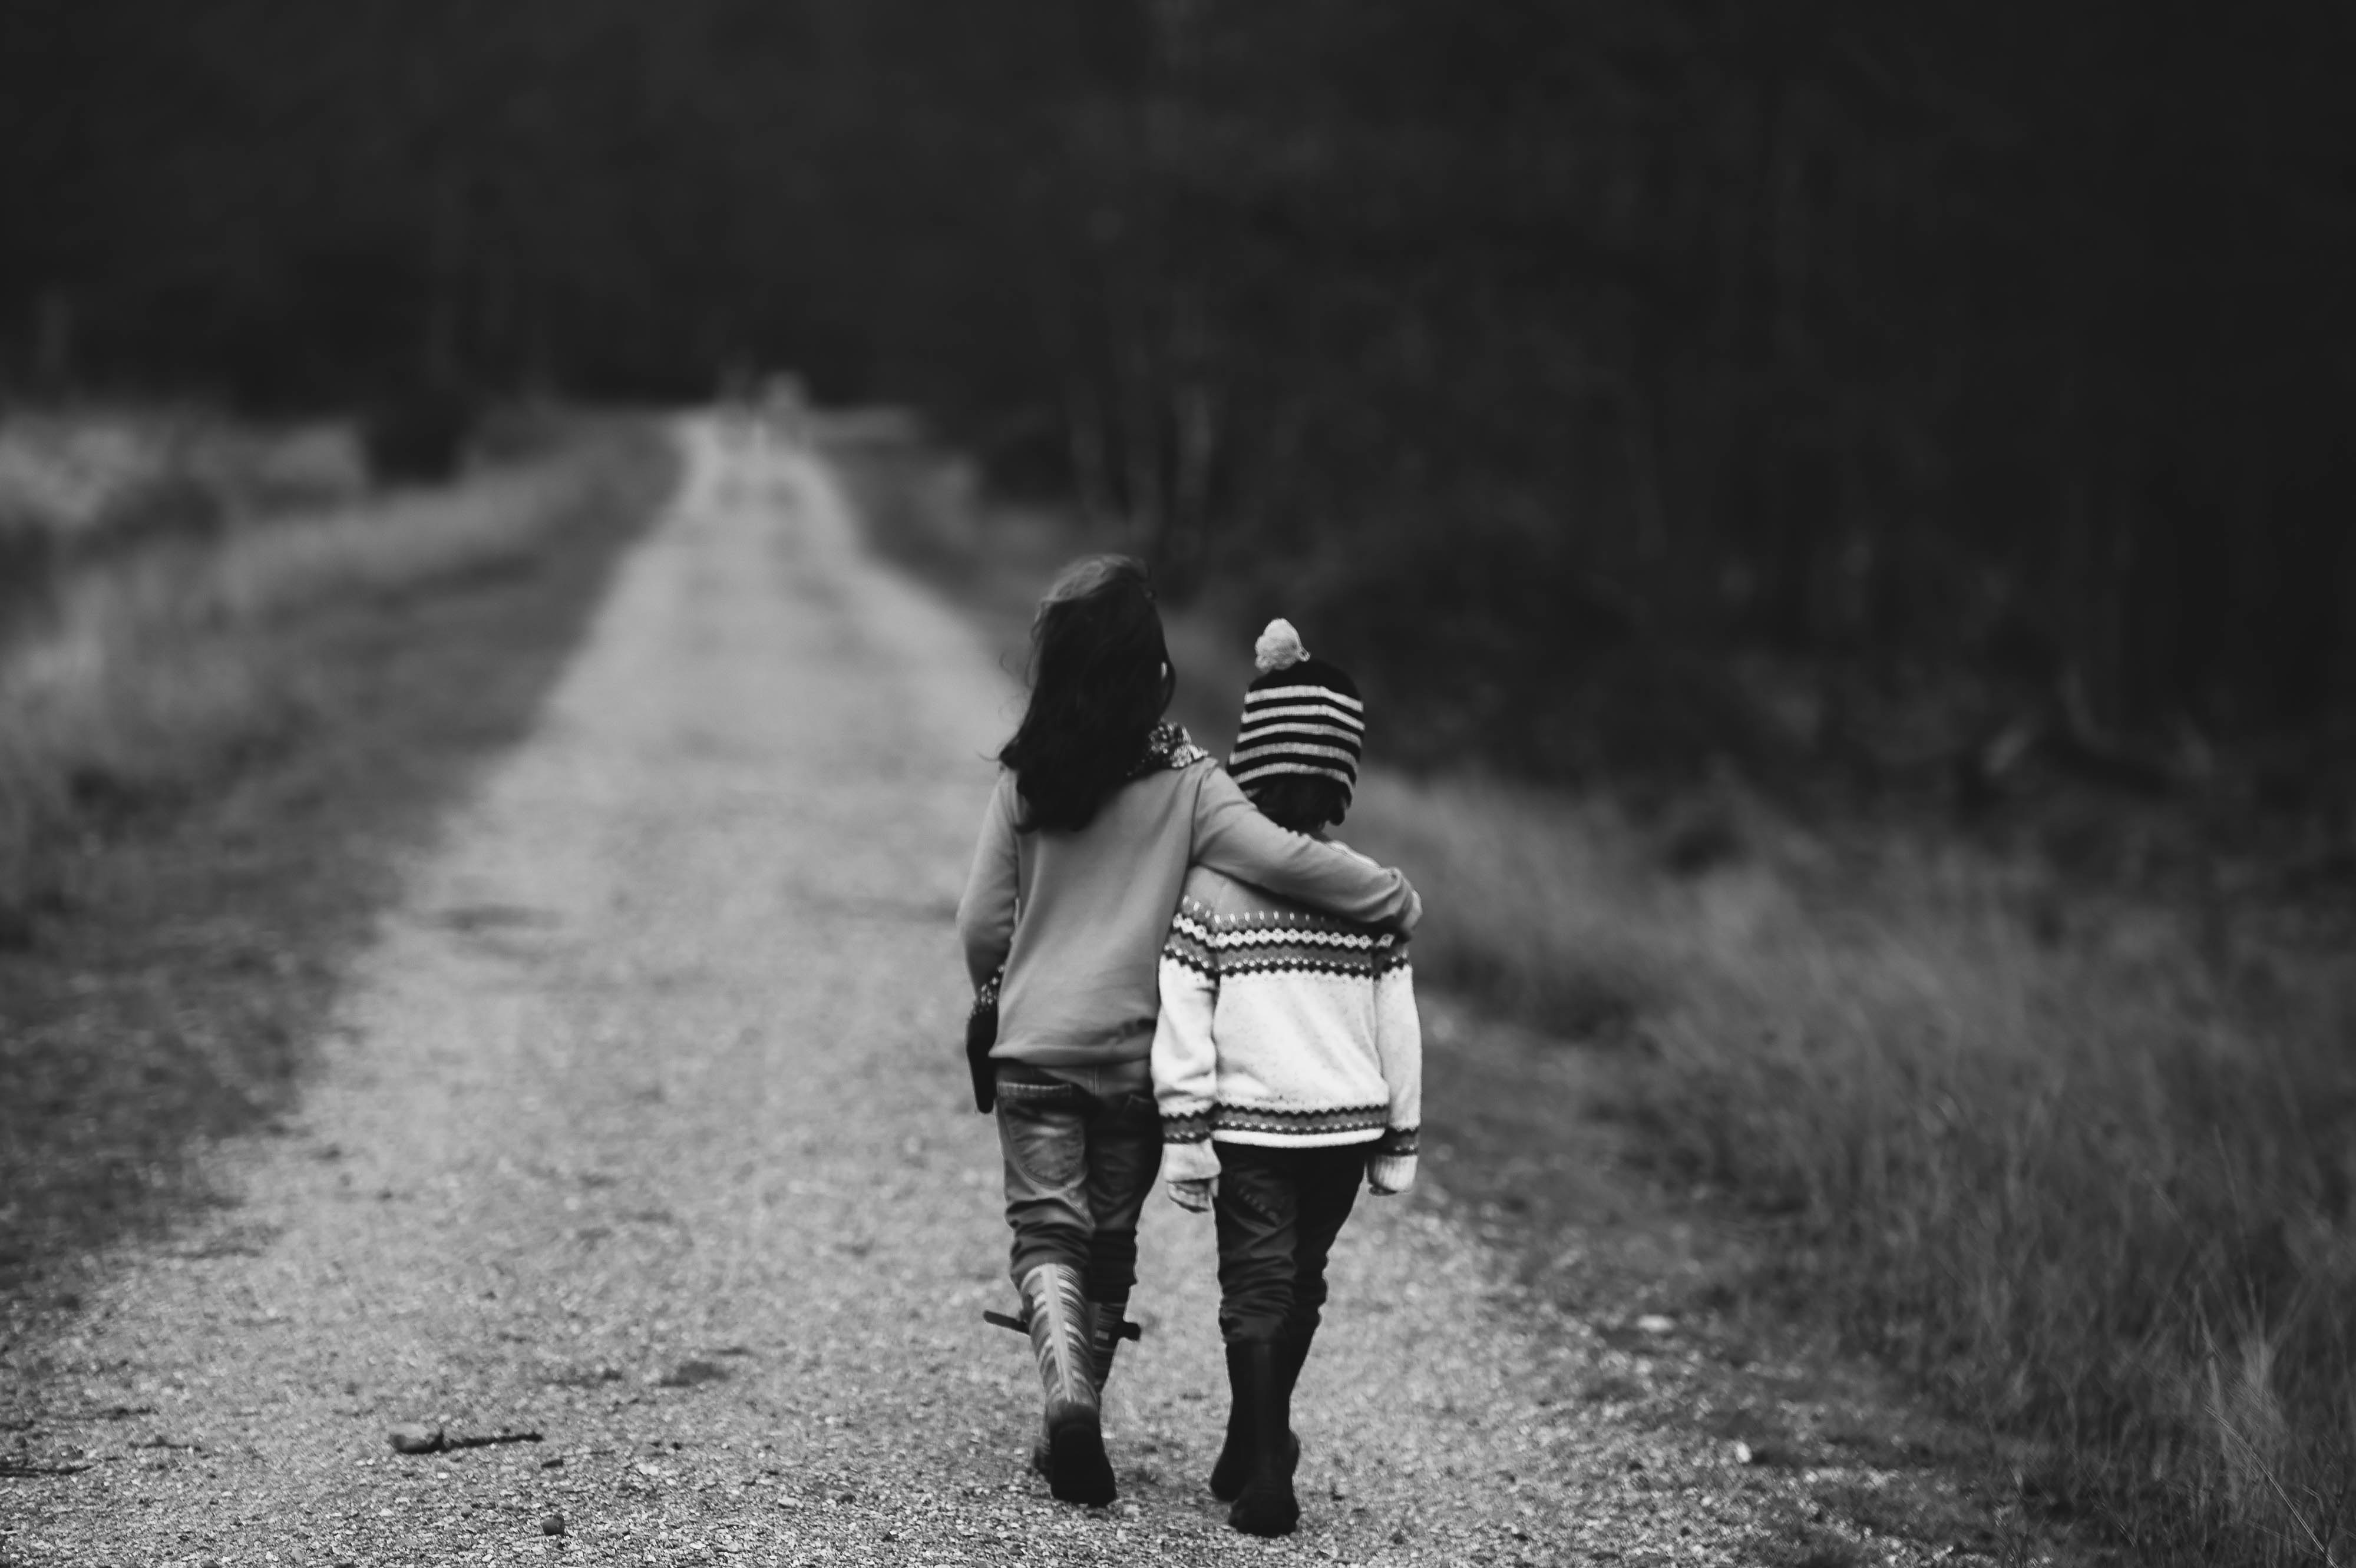 131854 download wallpaper stroll, children, miscellanea, miscellaneous, road, bw, chb, friends screensavers and pictures for free